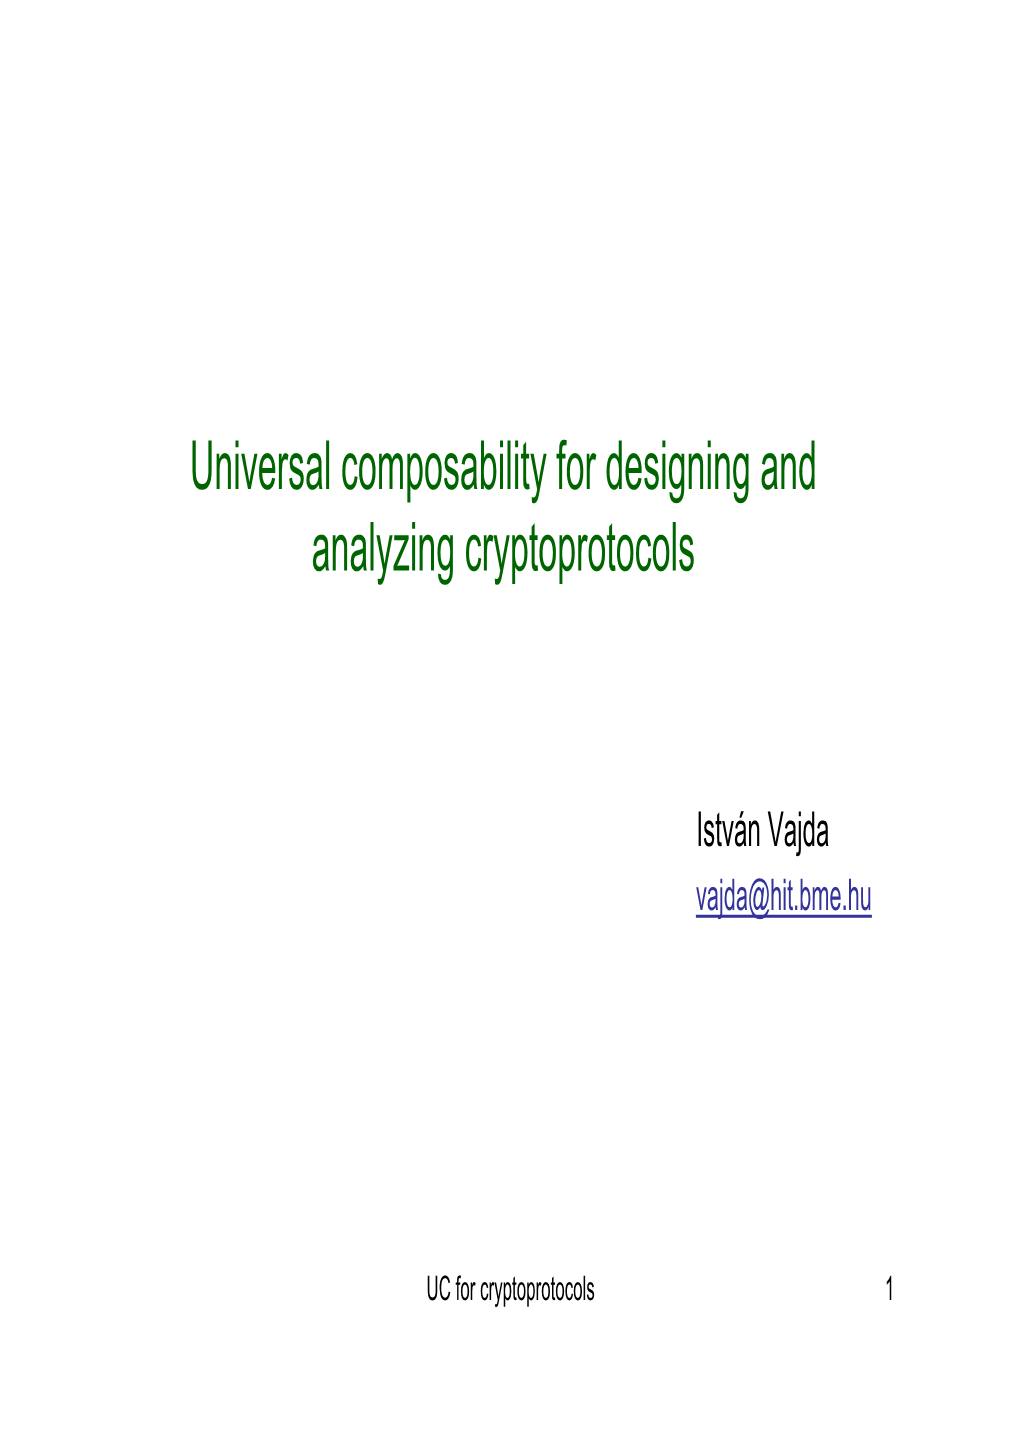 Universal Composability for Designing and Analyzing Cryptoprotocols